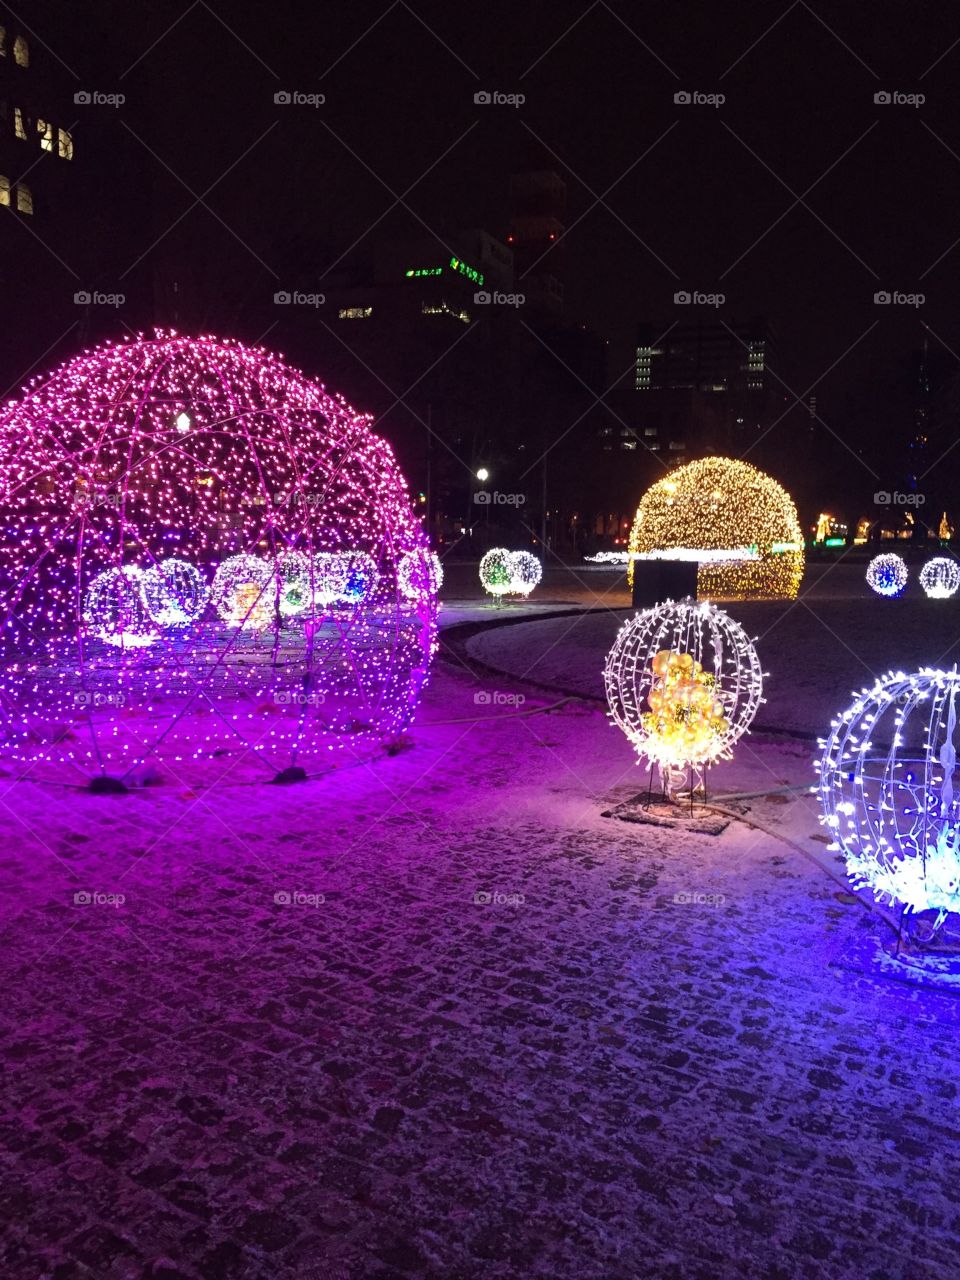 it's so cute illumination
this is a winter festival